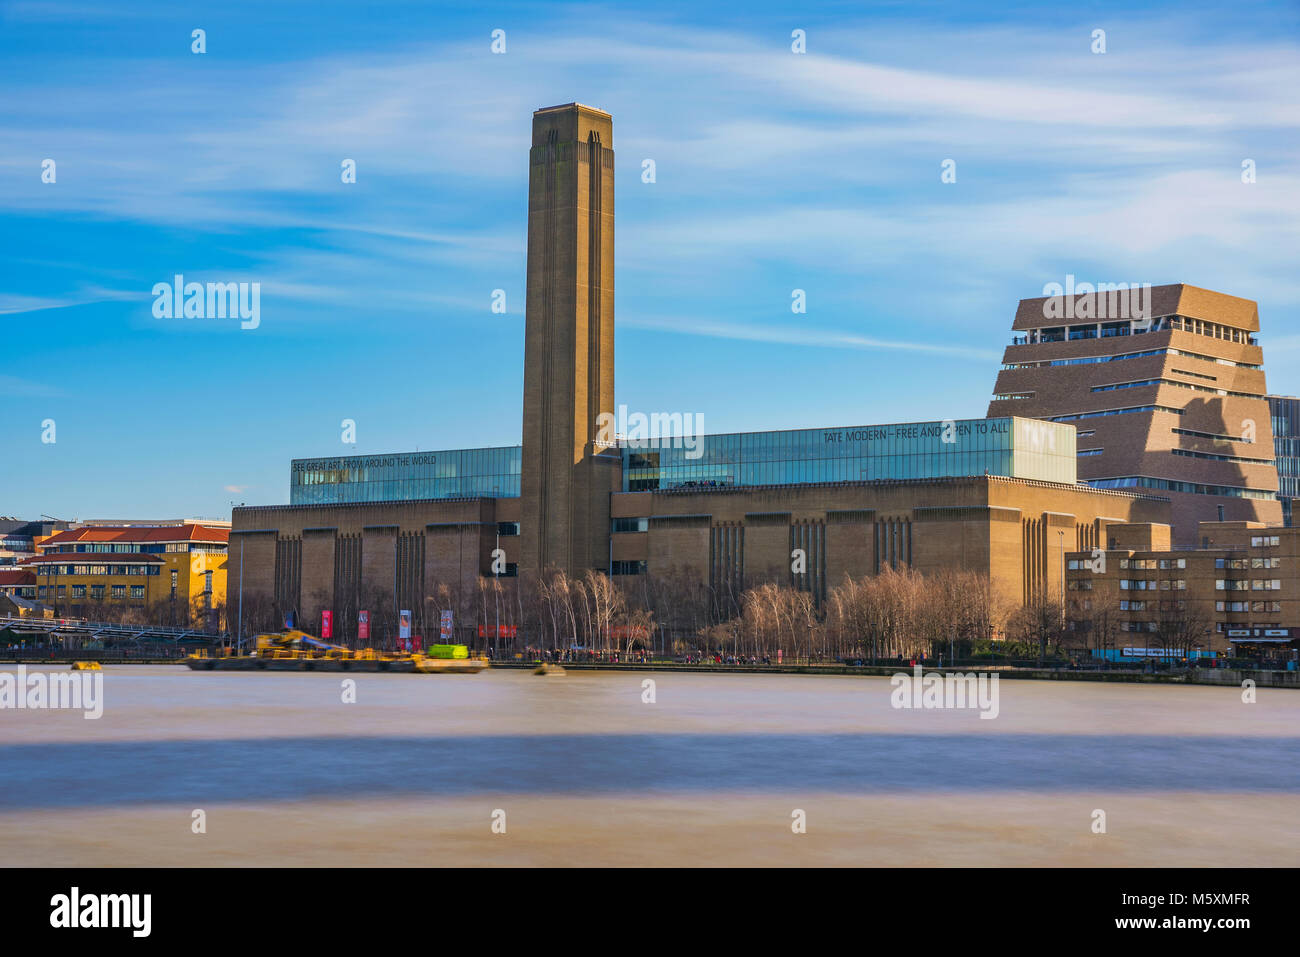 LONDON, UNITED KINGDOM - FEBRUARY 16: This is a view the Tate Modern art gallery, a famous museum and tourist attraction in the downtown area on Febru Stock Photo